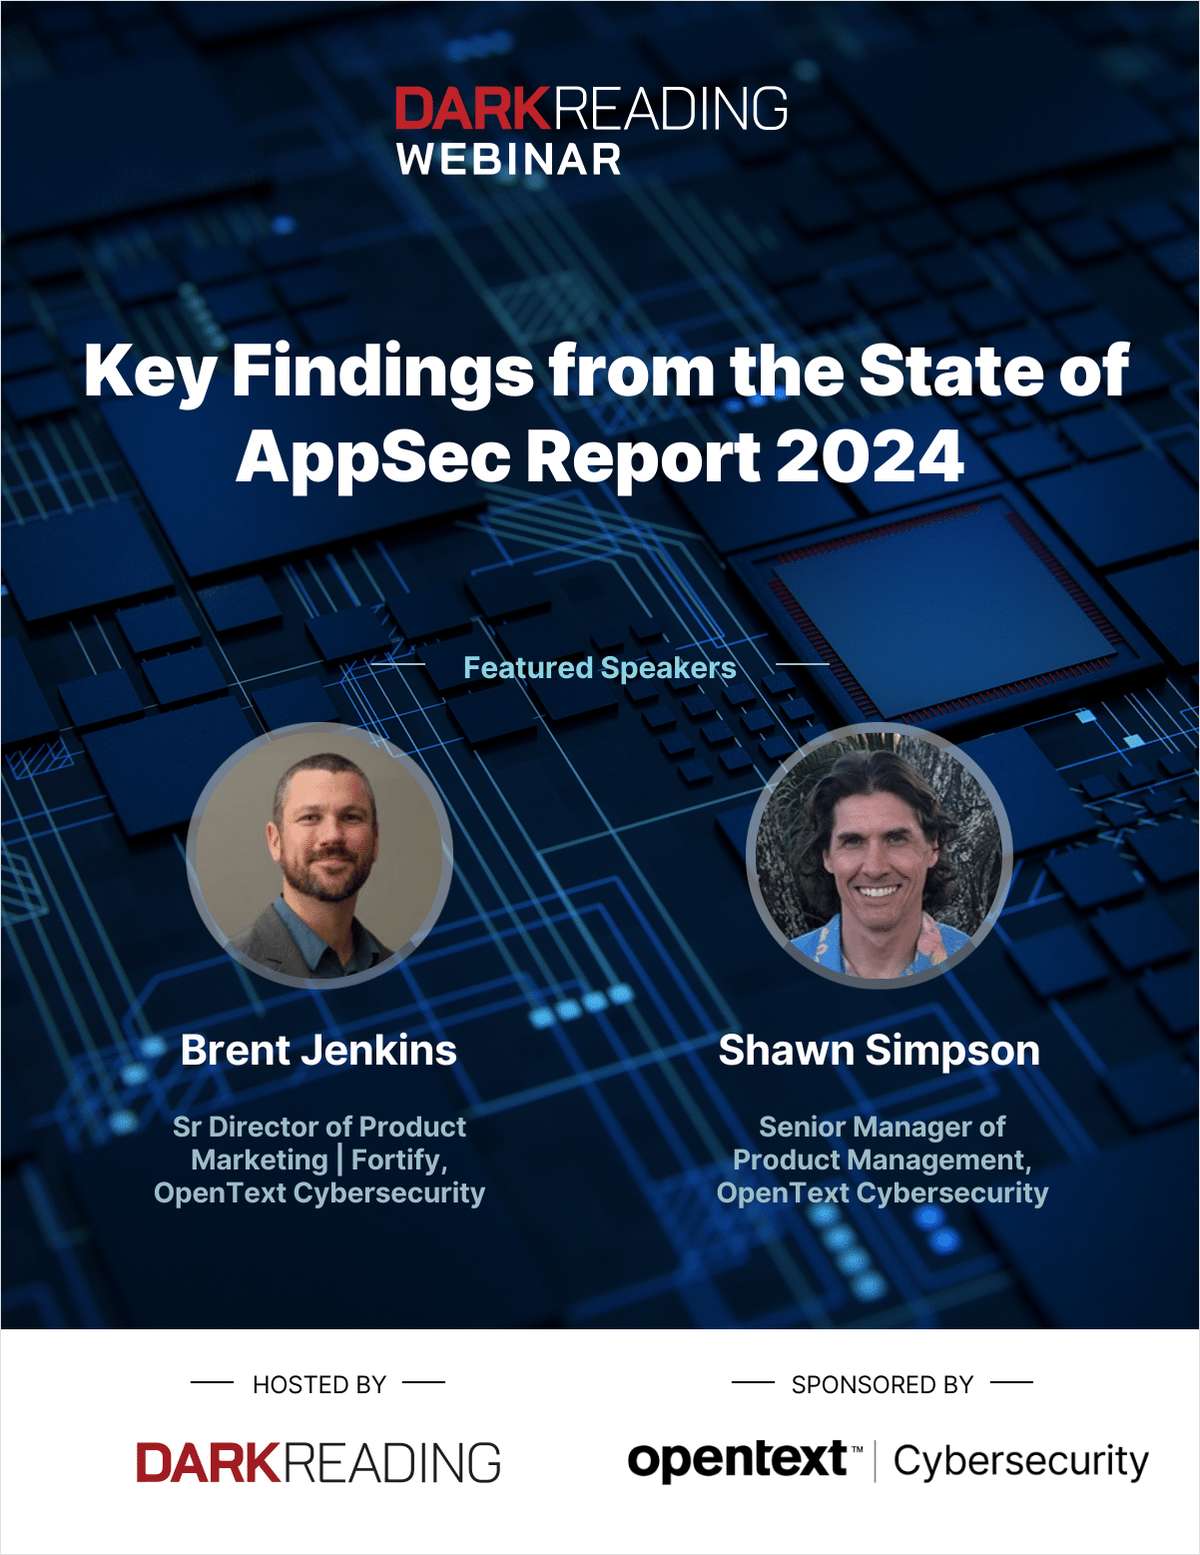 Key Findings from the State of AppSec Report 2024